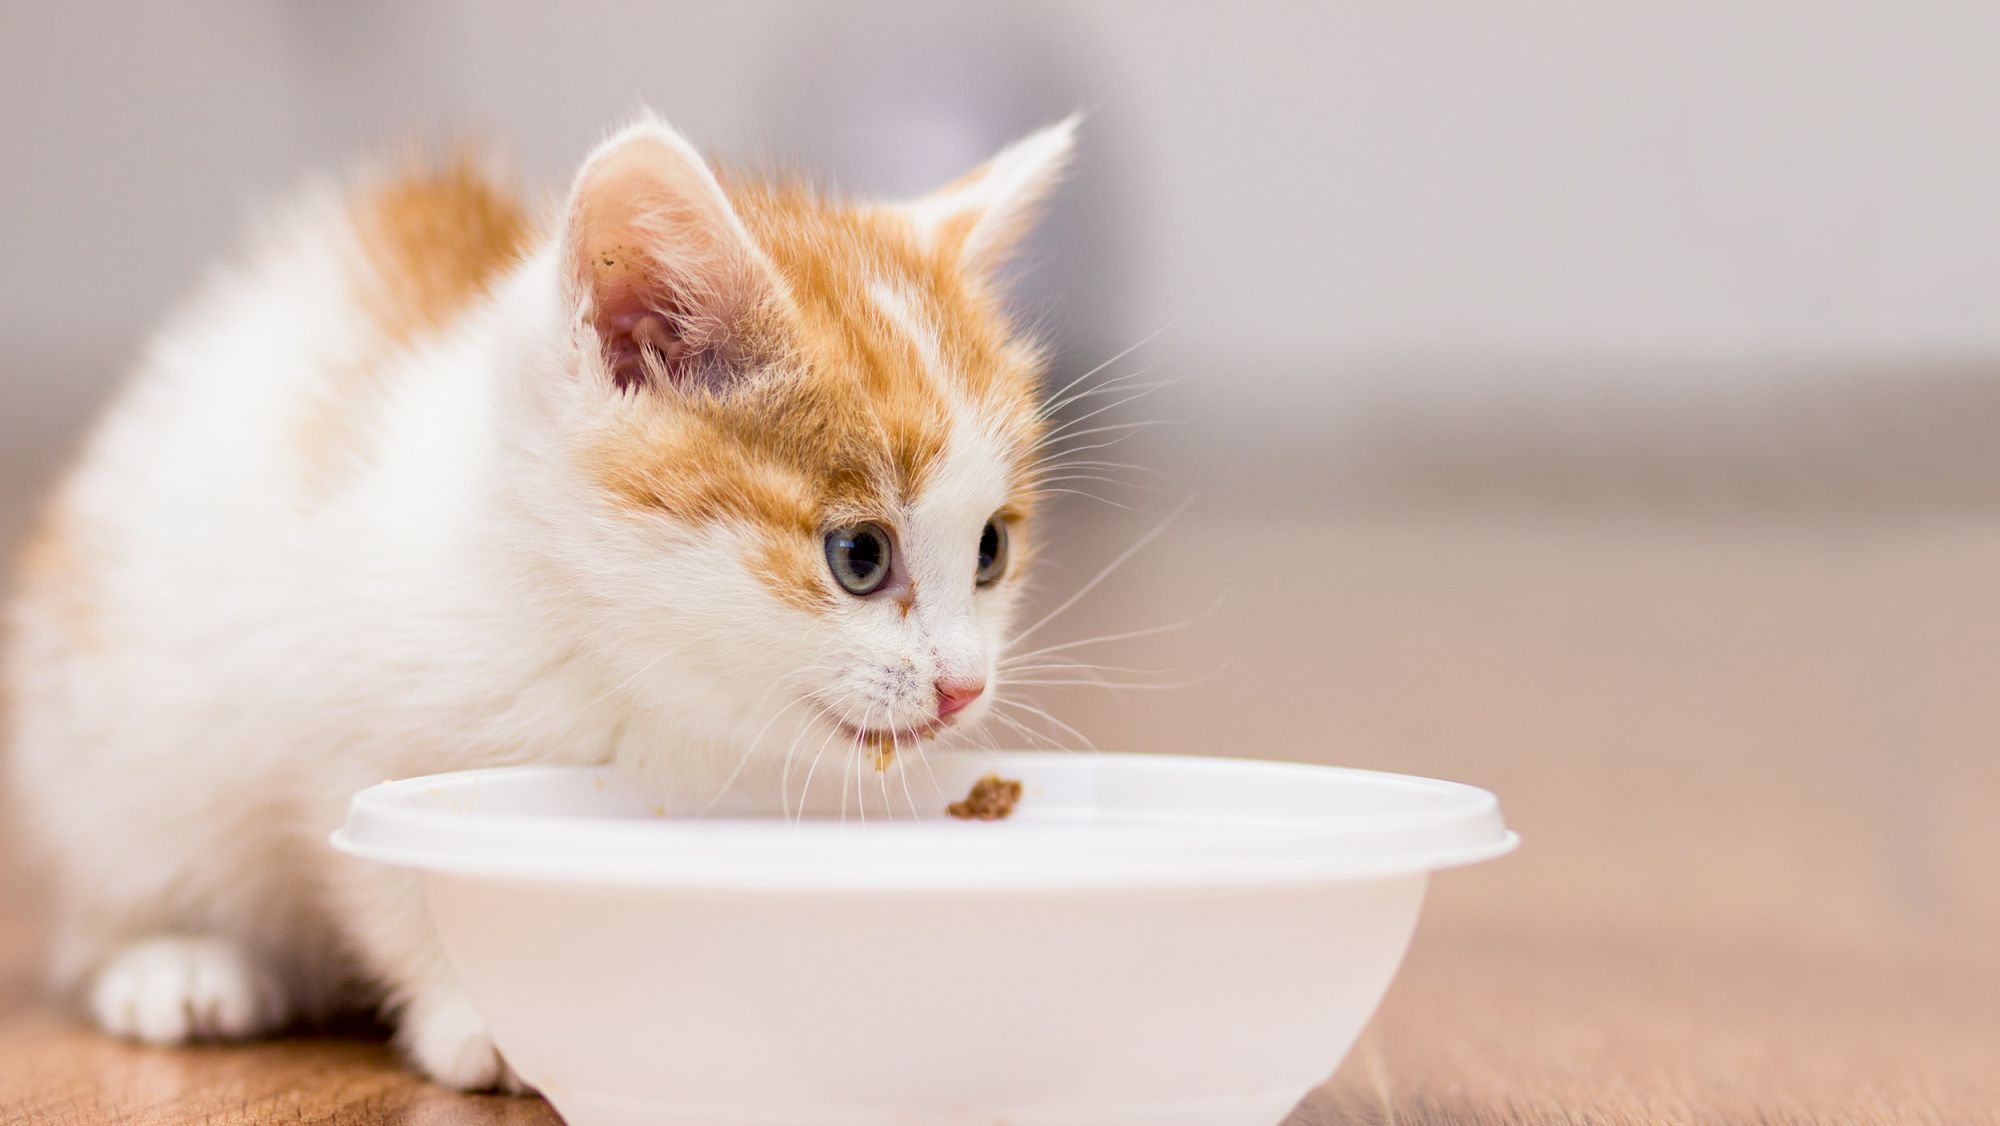 Kitten sitting indoors eating from a white bowl